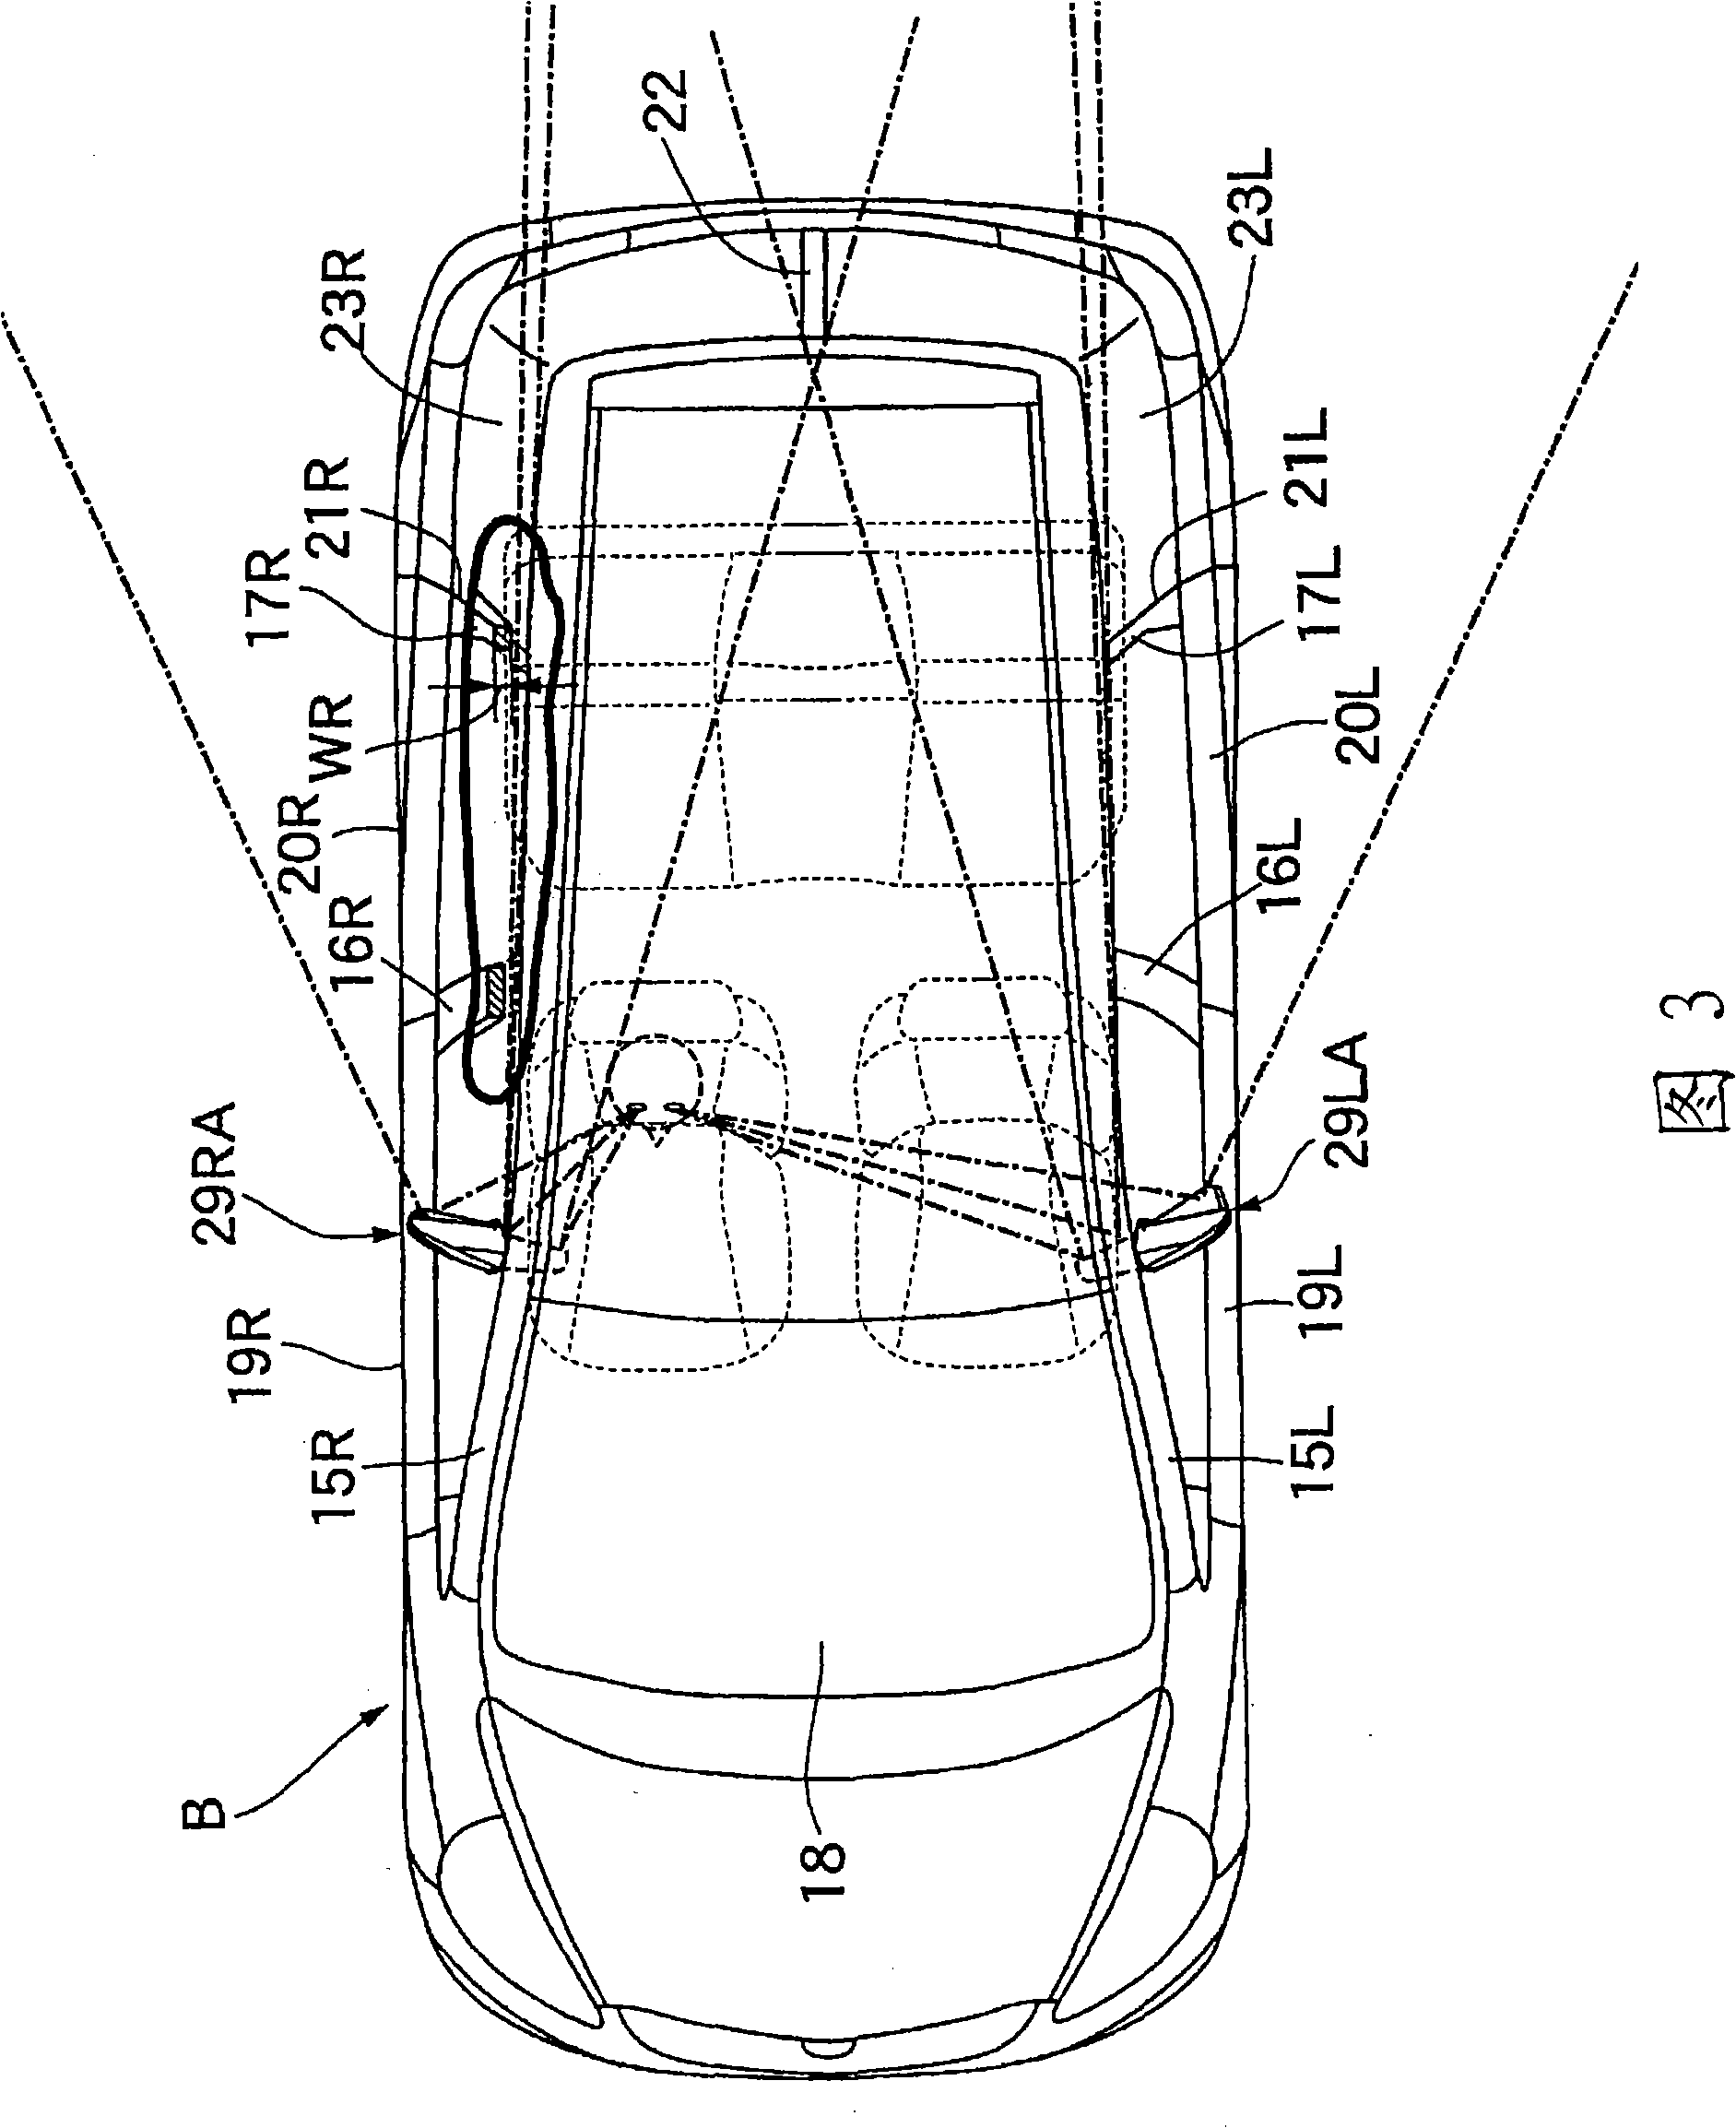 Integrated mirror device for vehicle